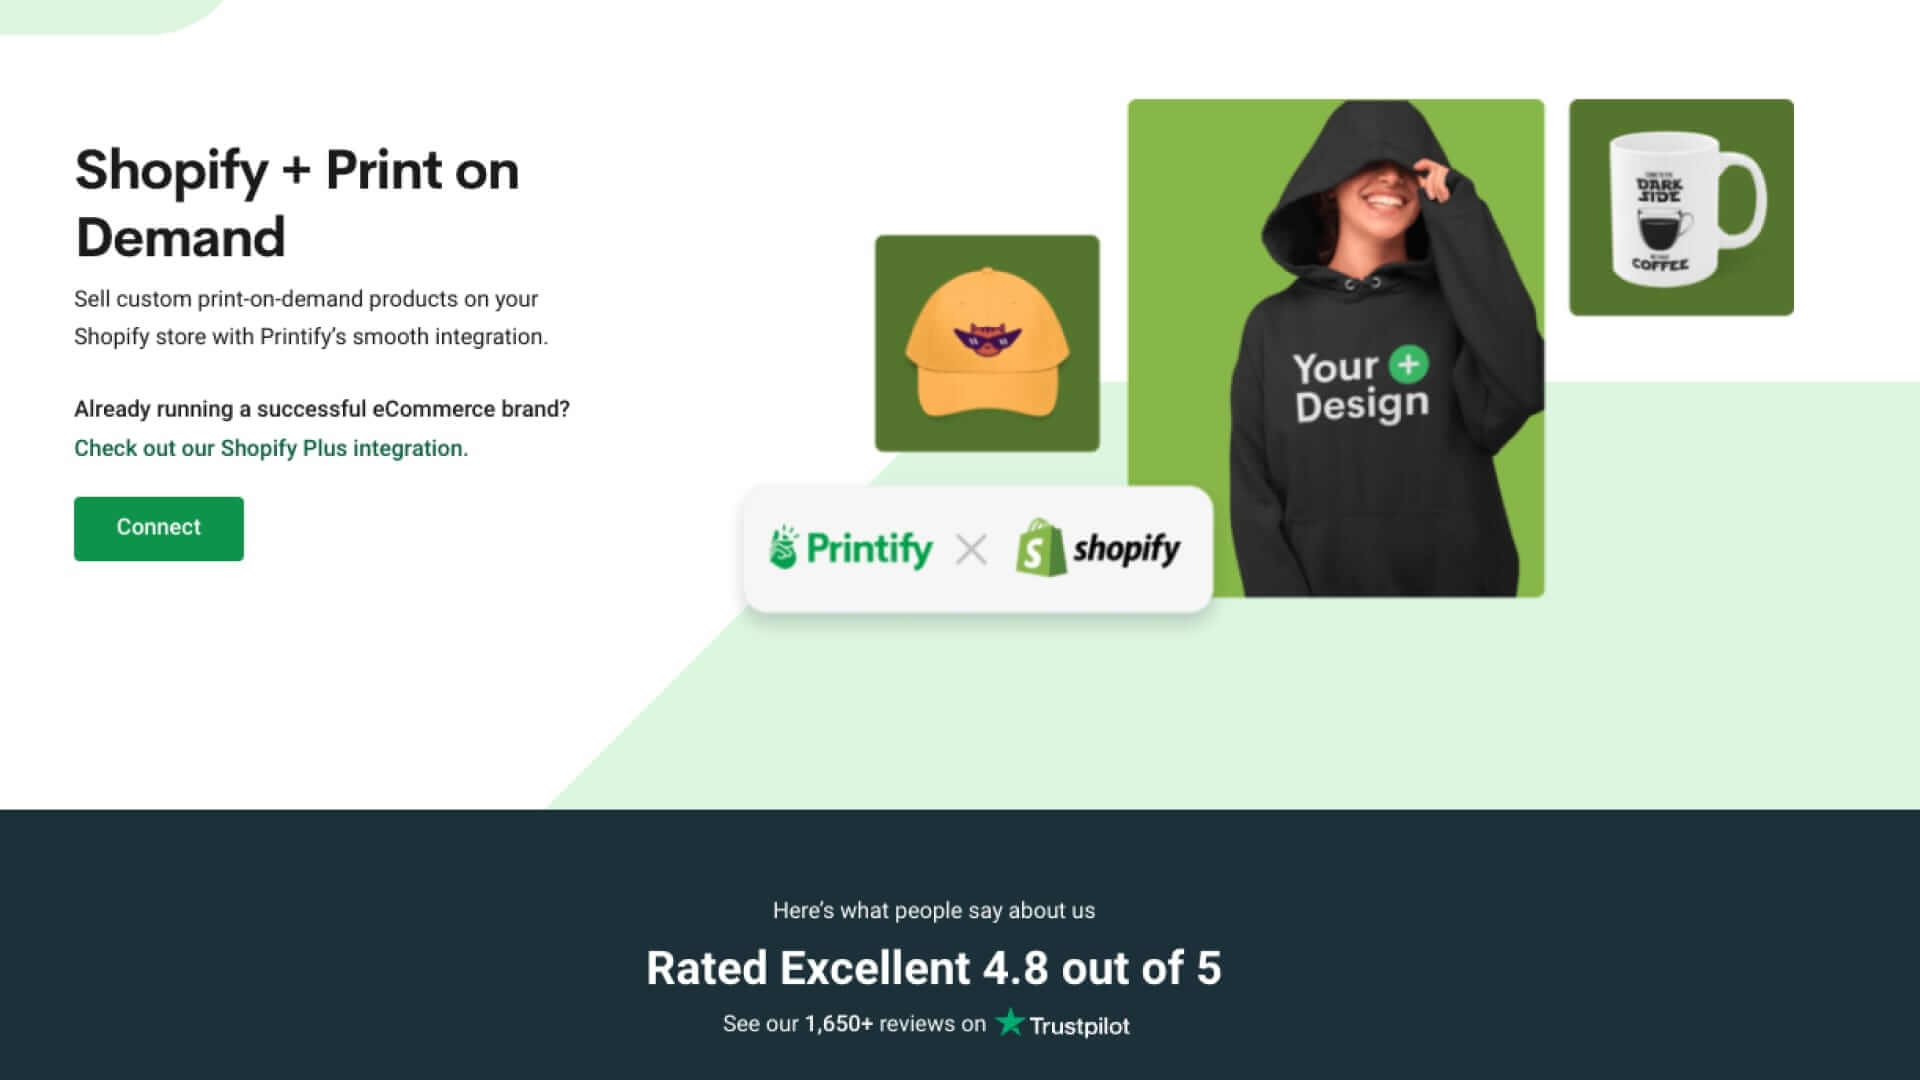 Shopify + Print on Demand landing page by Printify, highlighting their integration's excellent rating on Trustpilot.